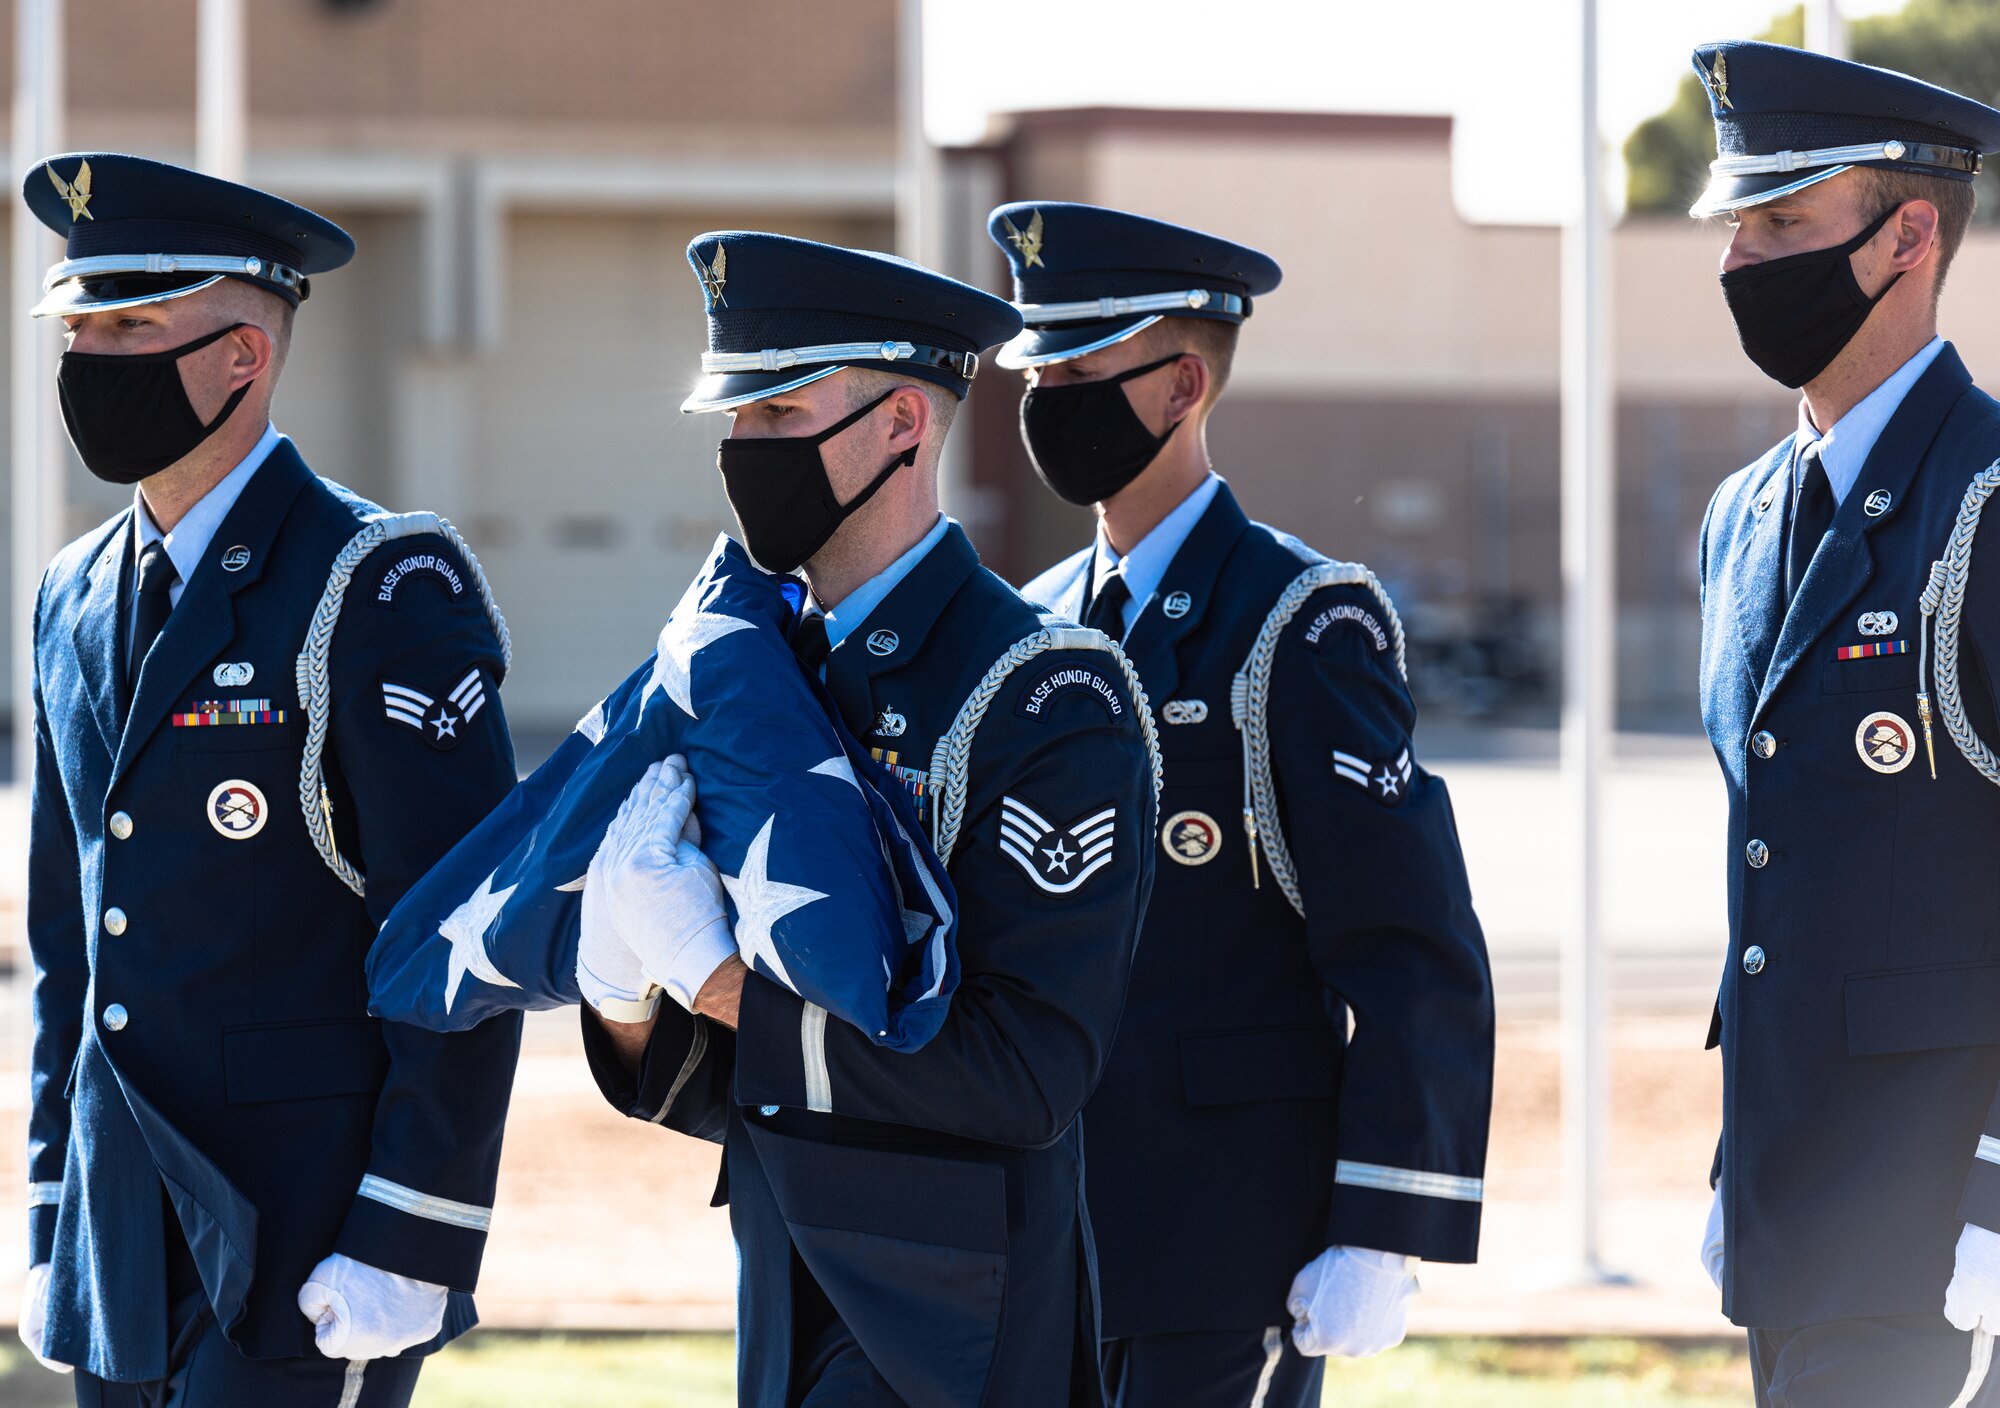 Airmen from Luke Air Force Base Honor Guard participate in the S.S. Mayaguez Memorial Retreat Ceremony, May 14, 2021, at Luke AFB, Arizona.